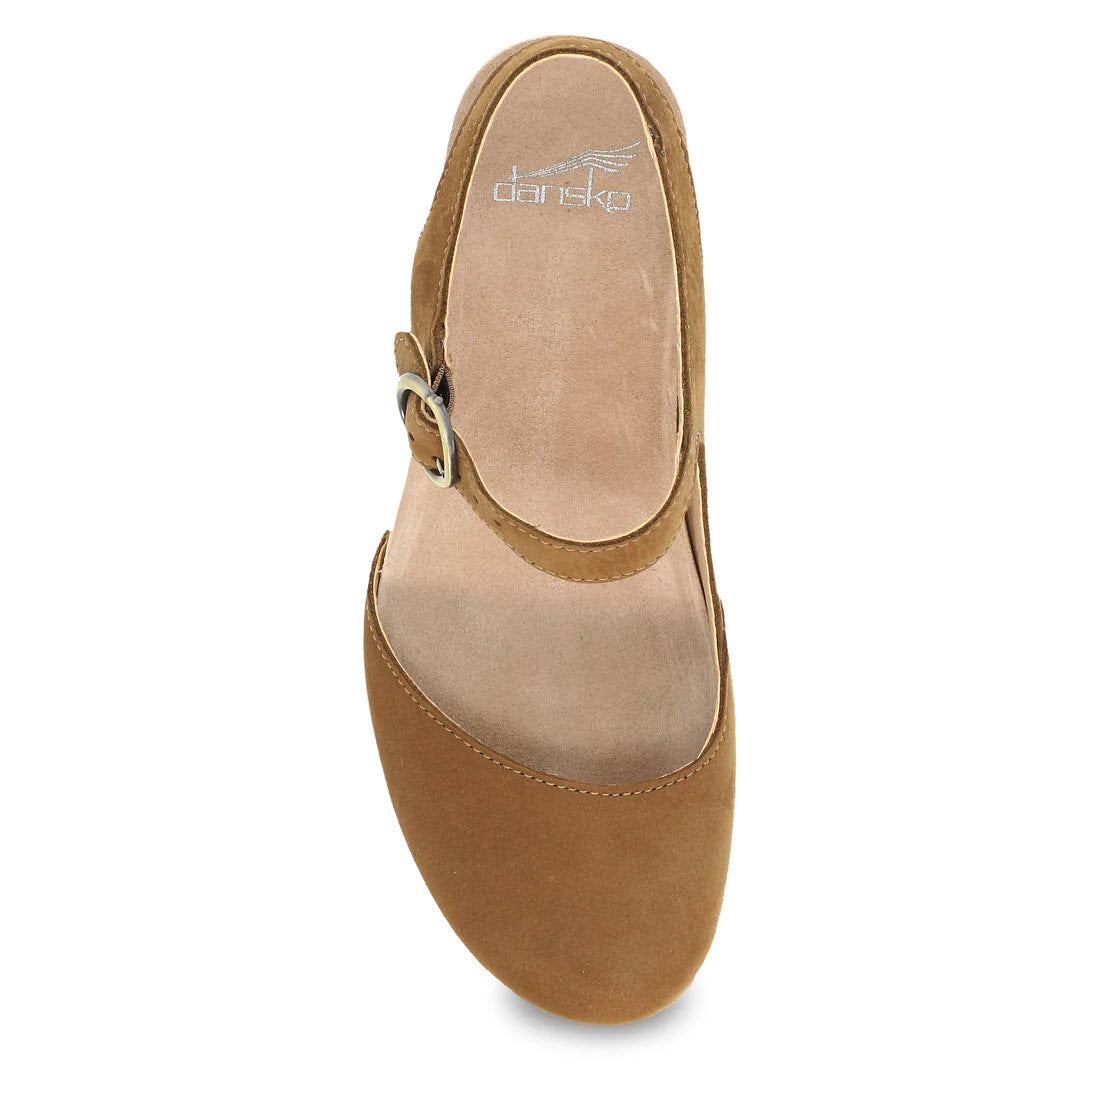 A top-down view of a single tan-colored women&#39;s Dansko Taytum mary jane shoe with a buckle.